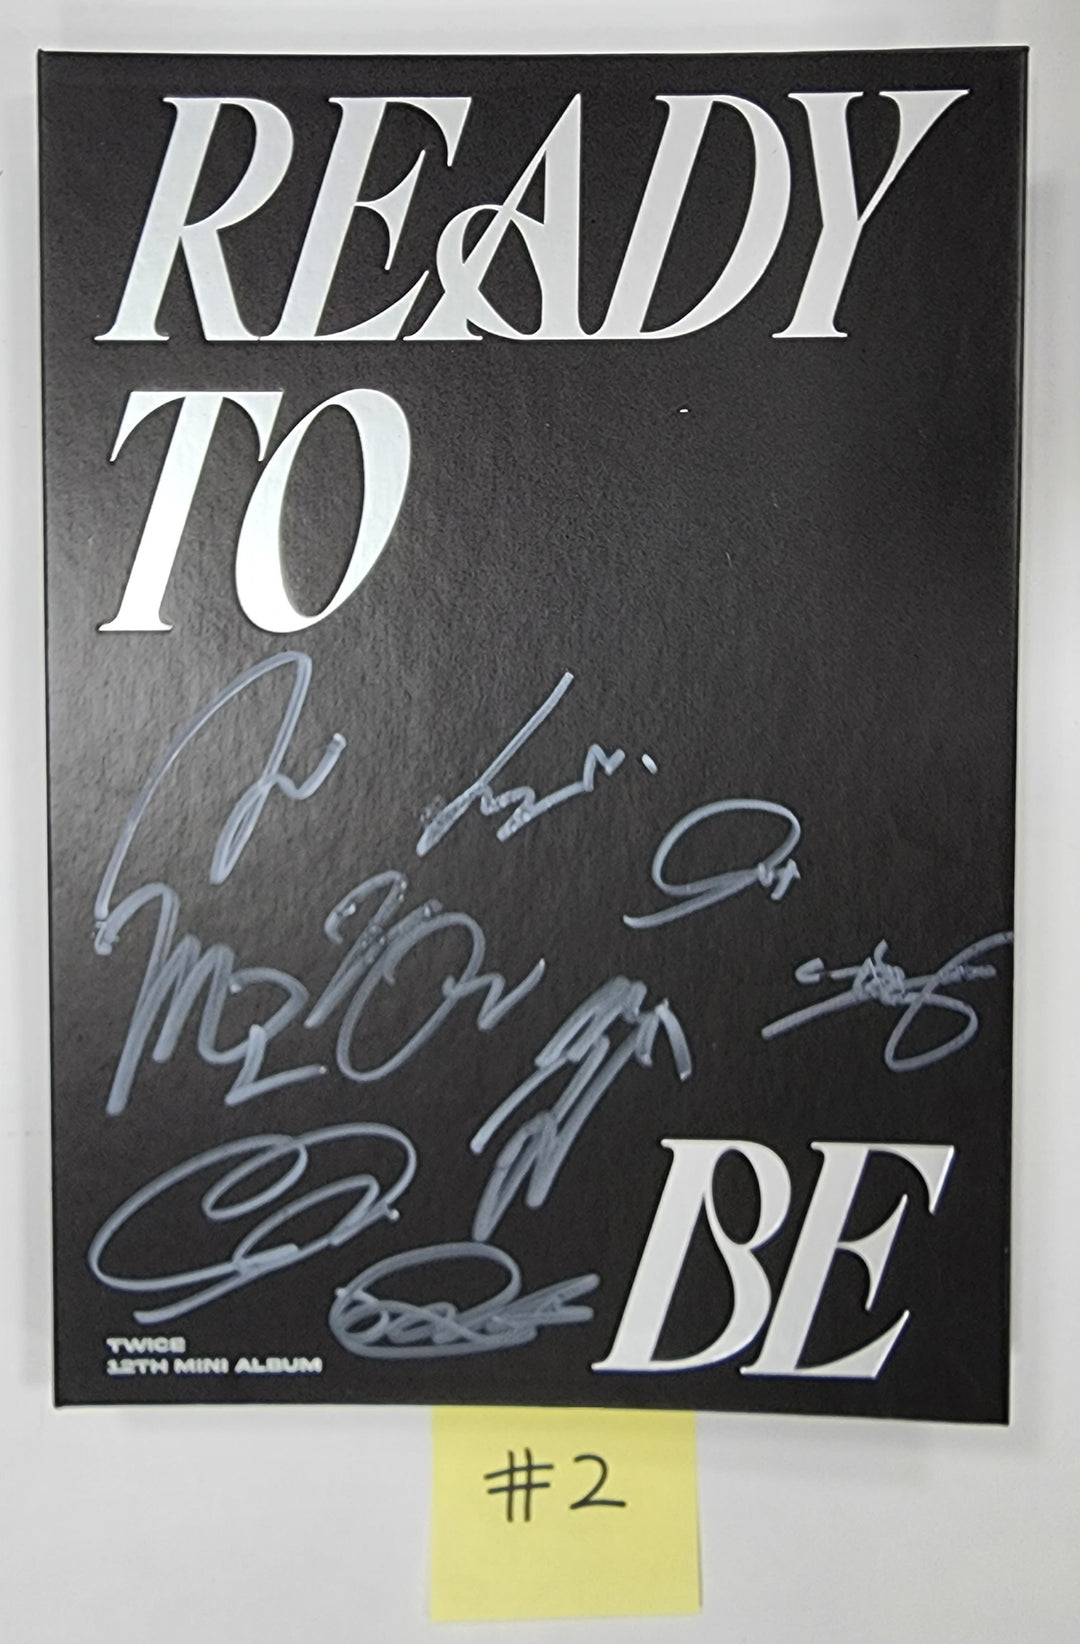 Twice "READY TO BE" - Hand Autographed(Signed) Promo Album (Restocked 3/24)